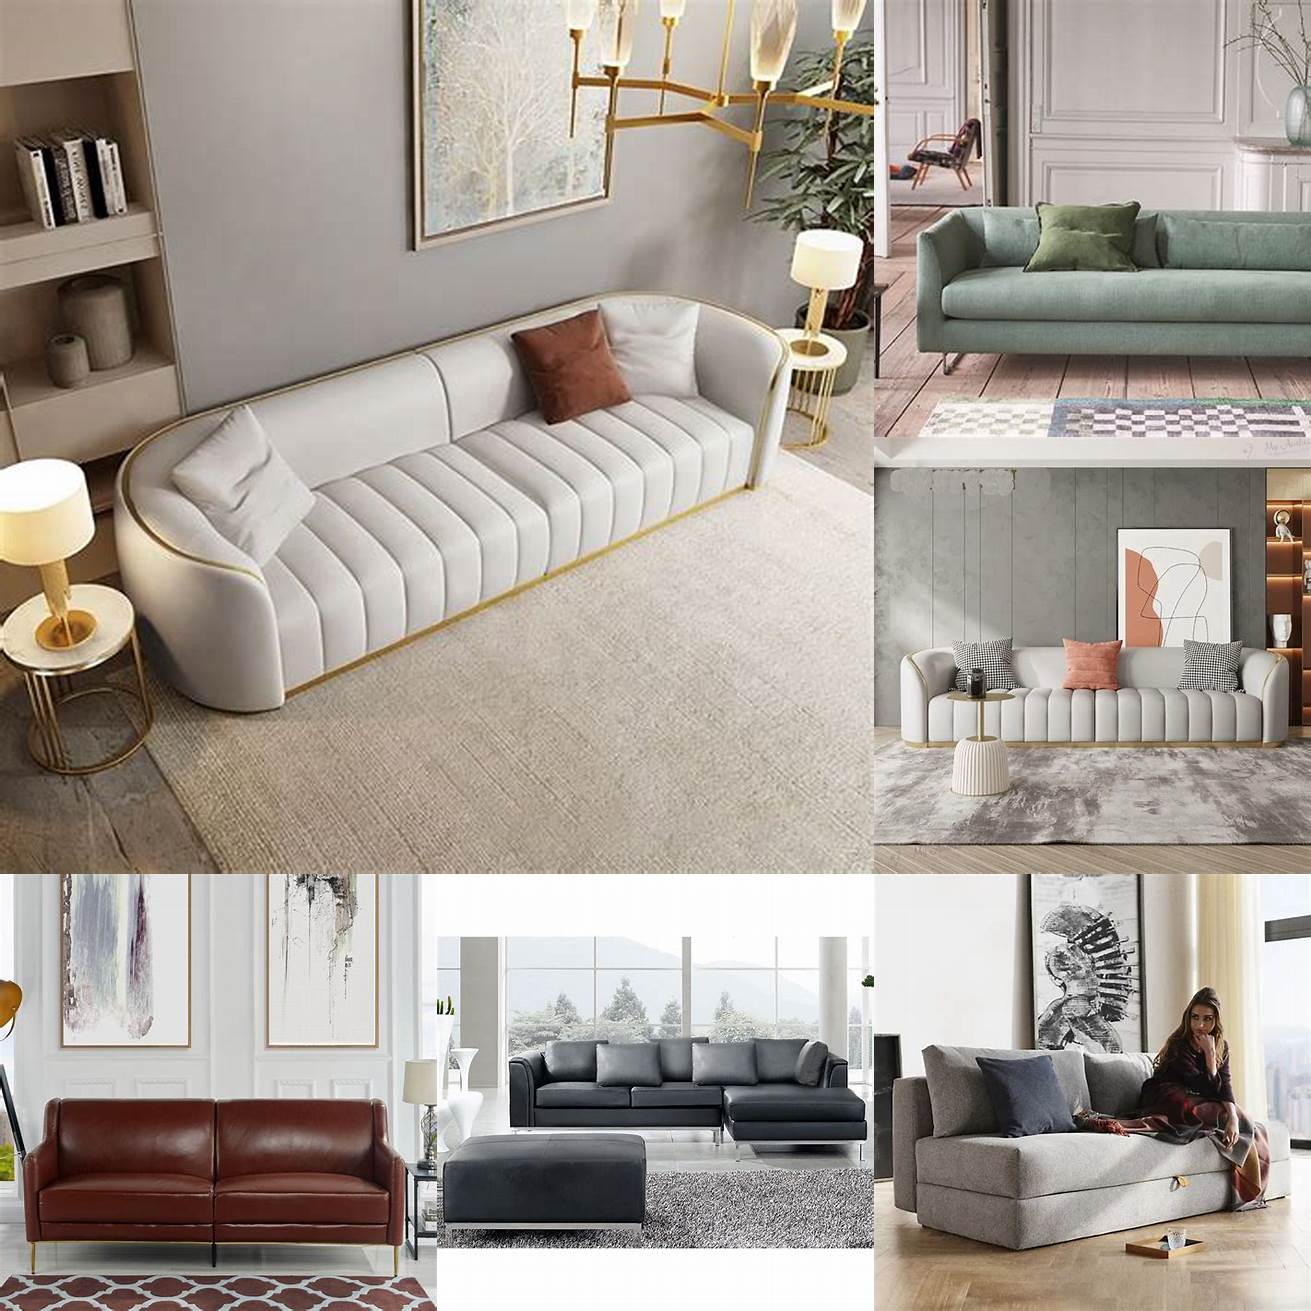 Sleek sofa A sleek modern sofa is a must-have in any modern living room Look for one with clean lines and a neutral color